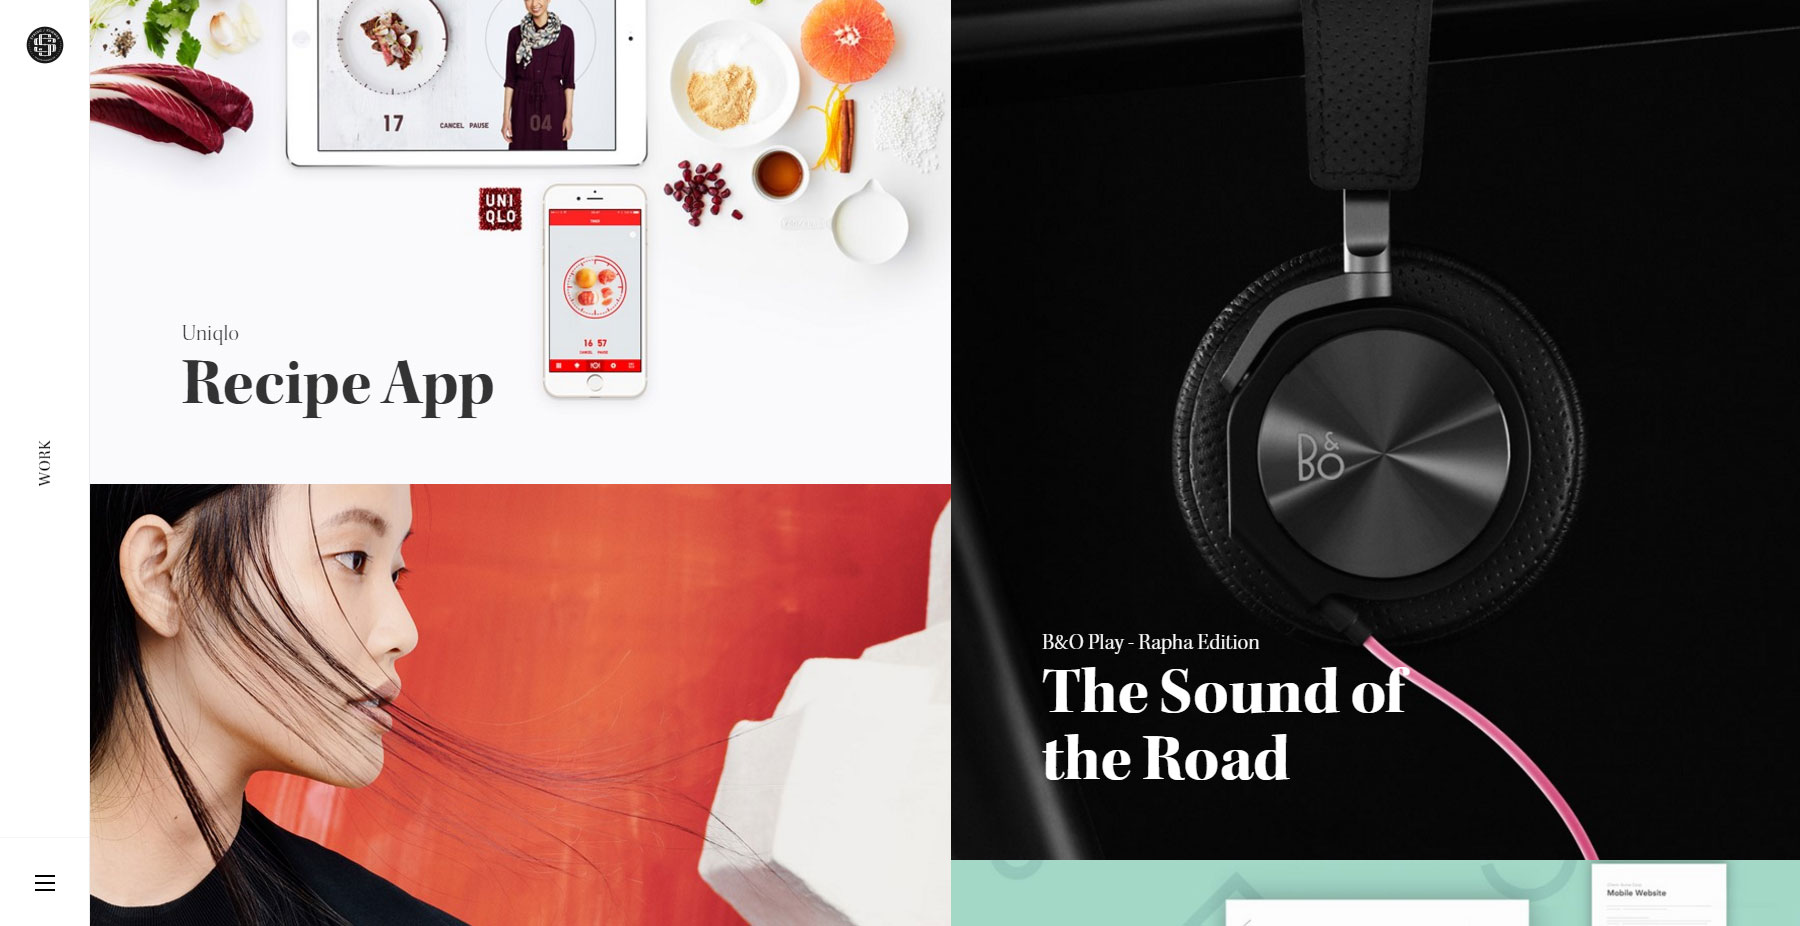 Spring/Summer 2016 - Website of the Day